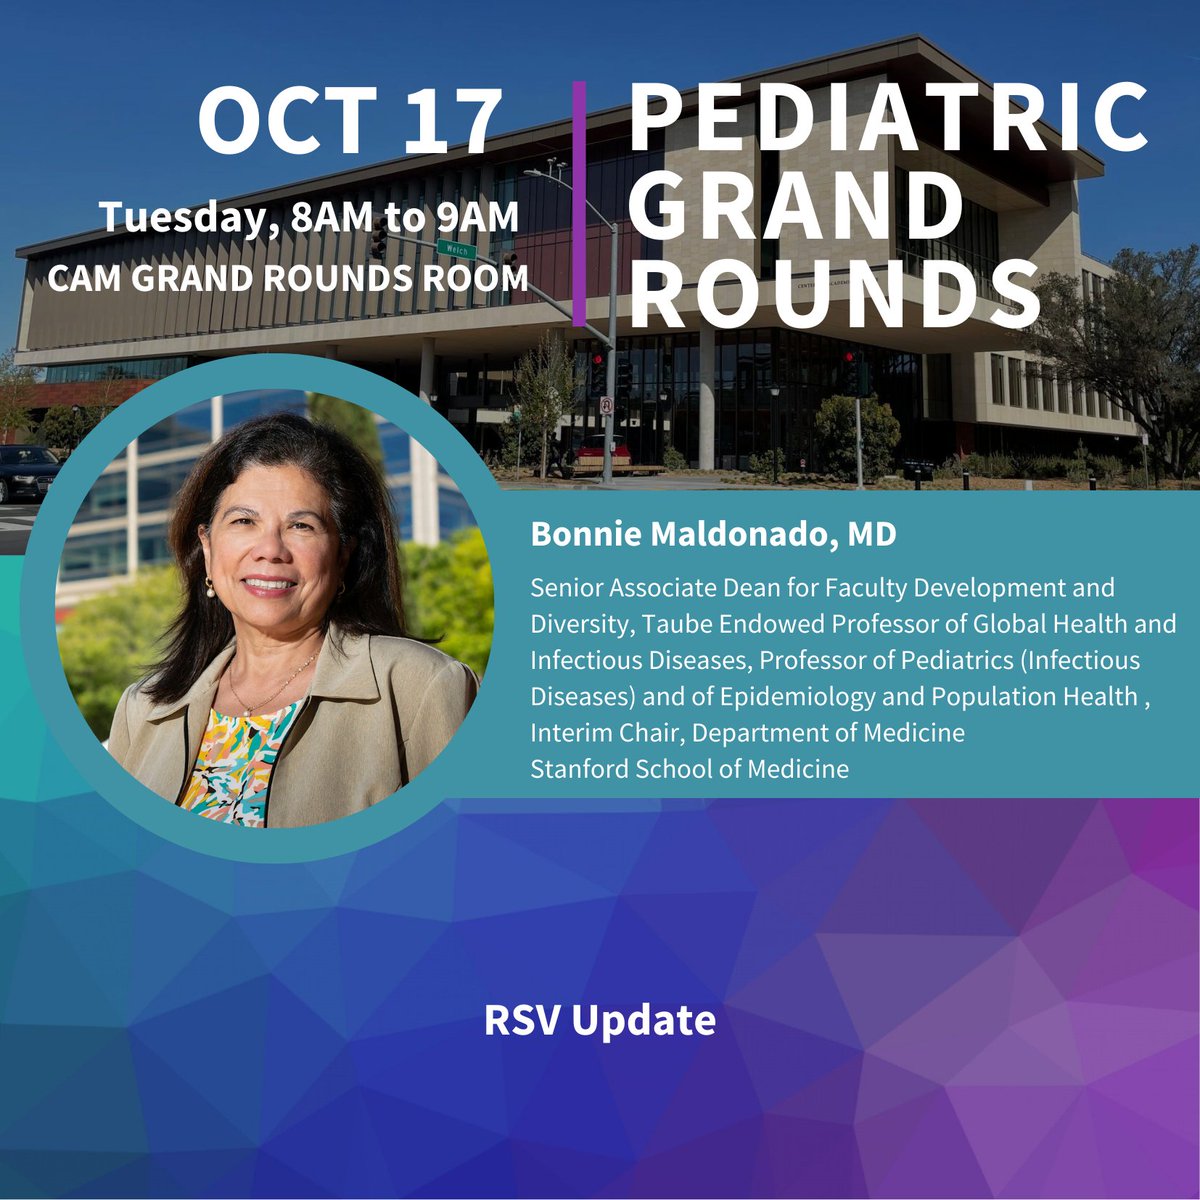 Join us tomorrow morning for an RSV Update with Dr. Bonnie Maldonado #pedsgrandrounds @StanfordMed @StanfordChild